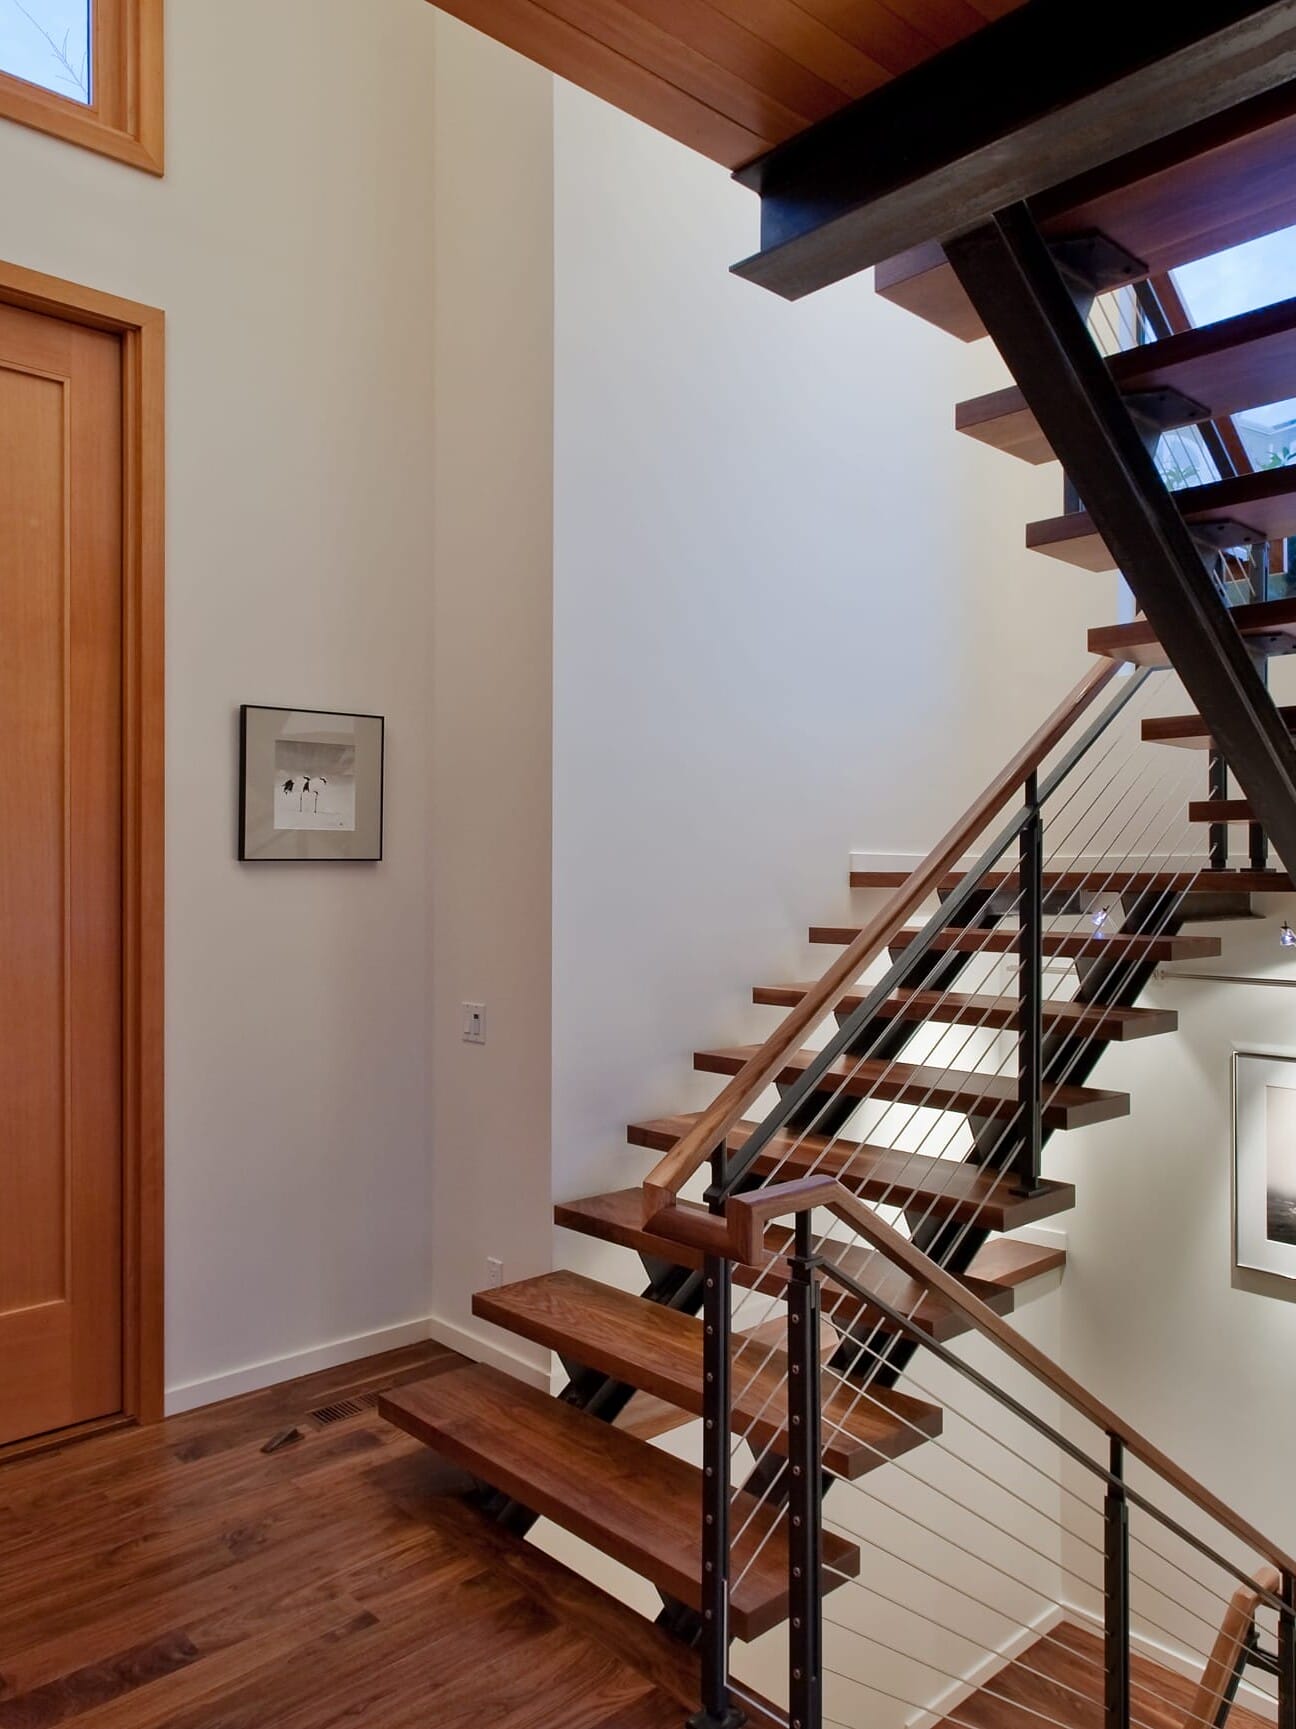 A modern staircase in a home with wooden railings.